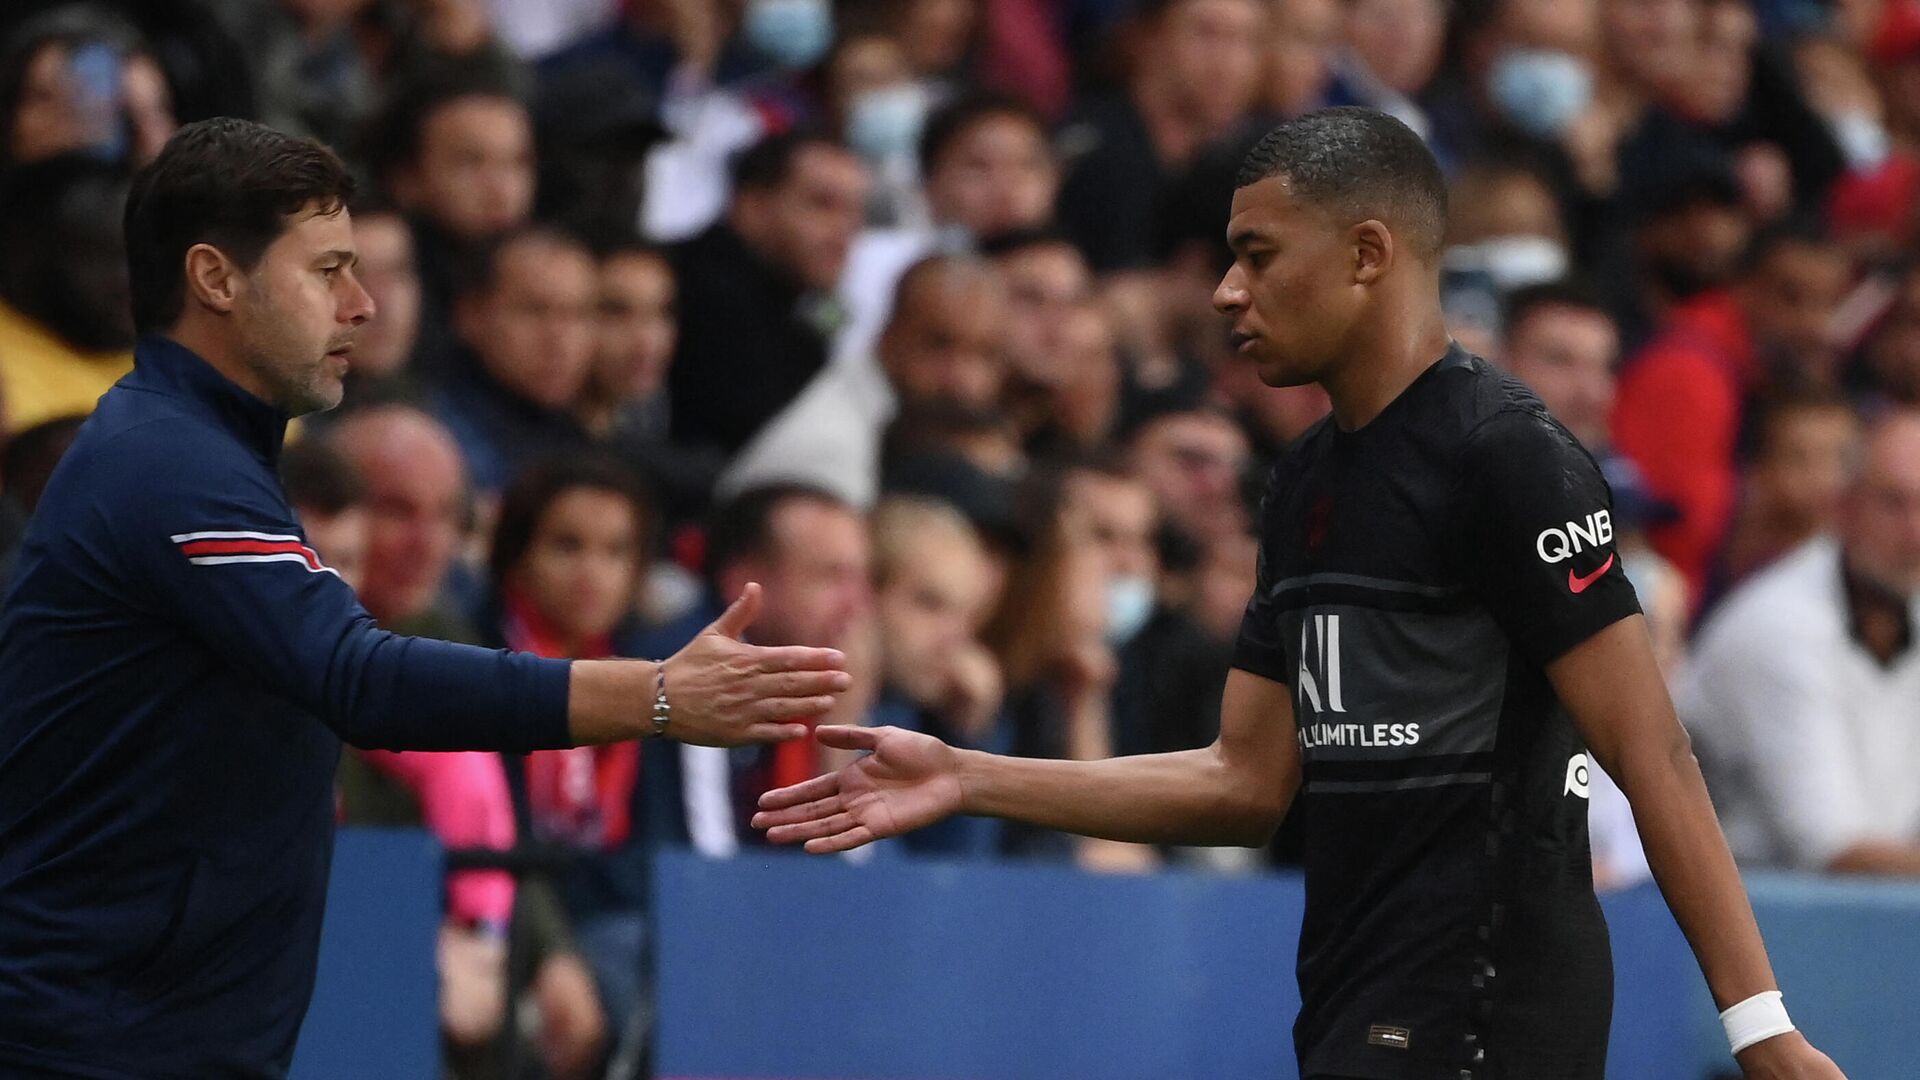 Paris Saint-Germain's French forward Kylian Mbappe greets Paris Saint-Germain's Argentinian head coach Mauricio Pochettino as he is substituted during the French L1 football match between Paris Saint-Germain (PSG) and Montpellier (MHSC) at The Parc des Princes stadium in Paris on September 25, 2021. (Photo by FRANCK FIFE / AFP) - РИА Новости, 1920, 26.09.2021